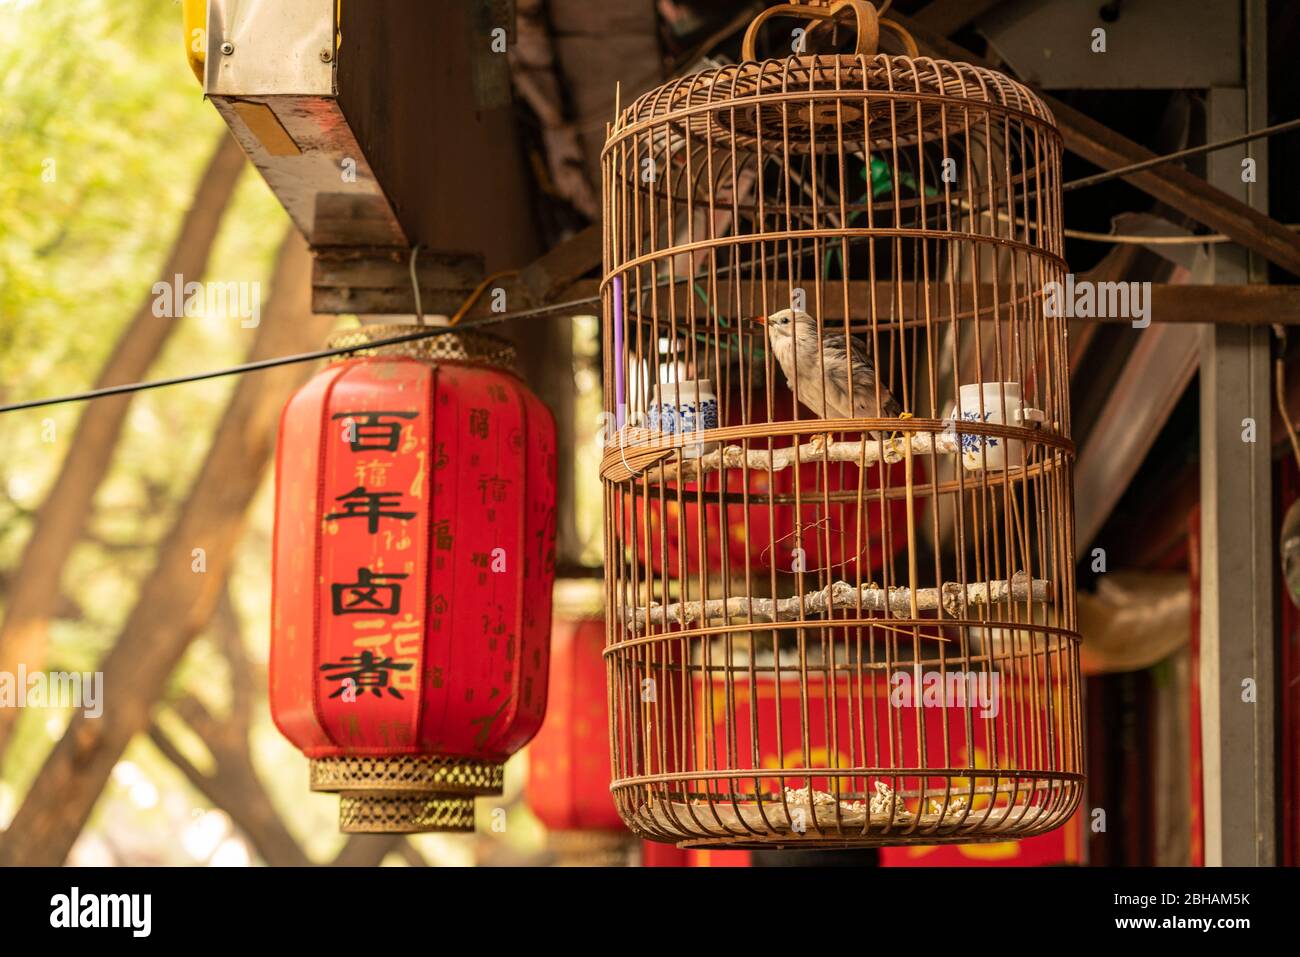 Asia, People's Republic of China, North China, Beijing, northern capital, songbird in cage Stock Photo